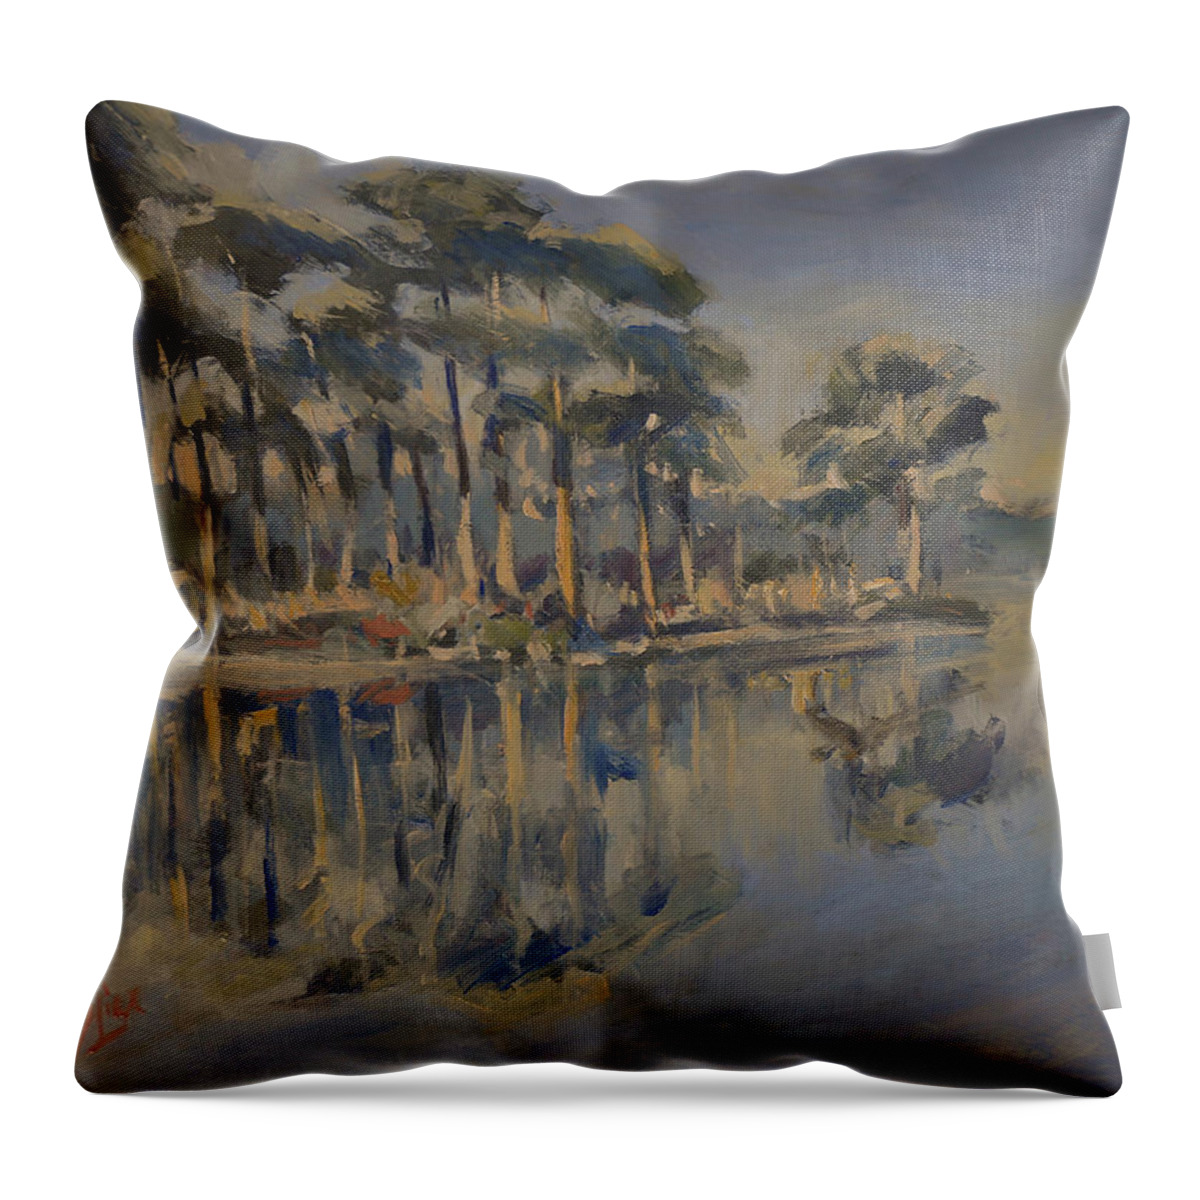 Fen Throw Pillow featuring the painting Fen with pine trees by Nop Briex